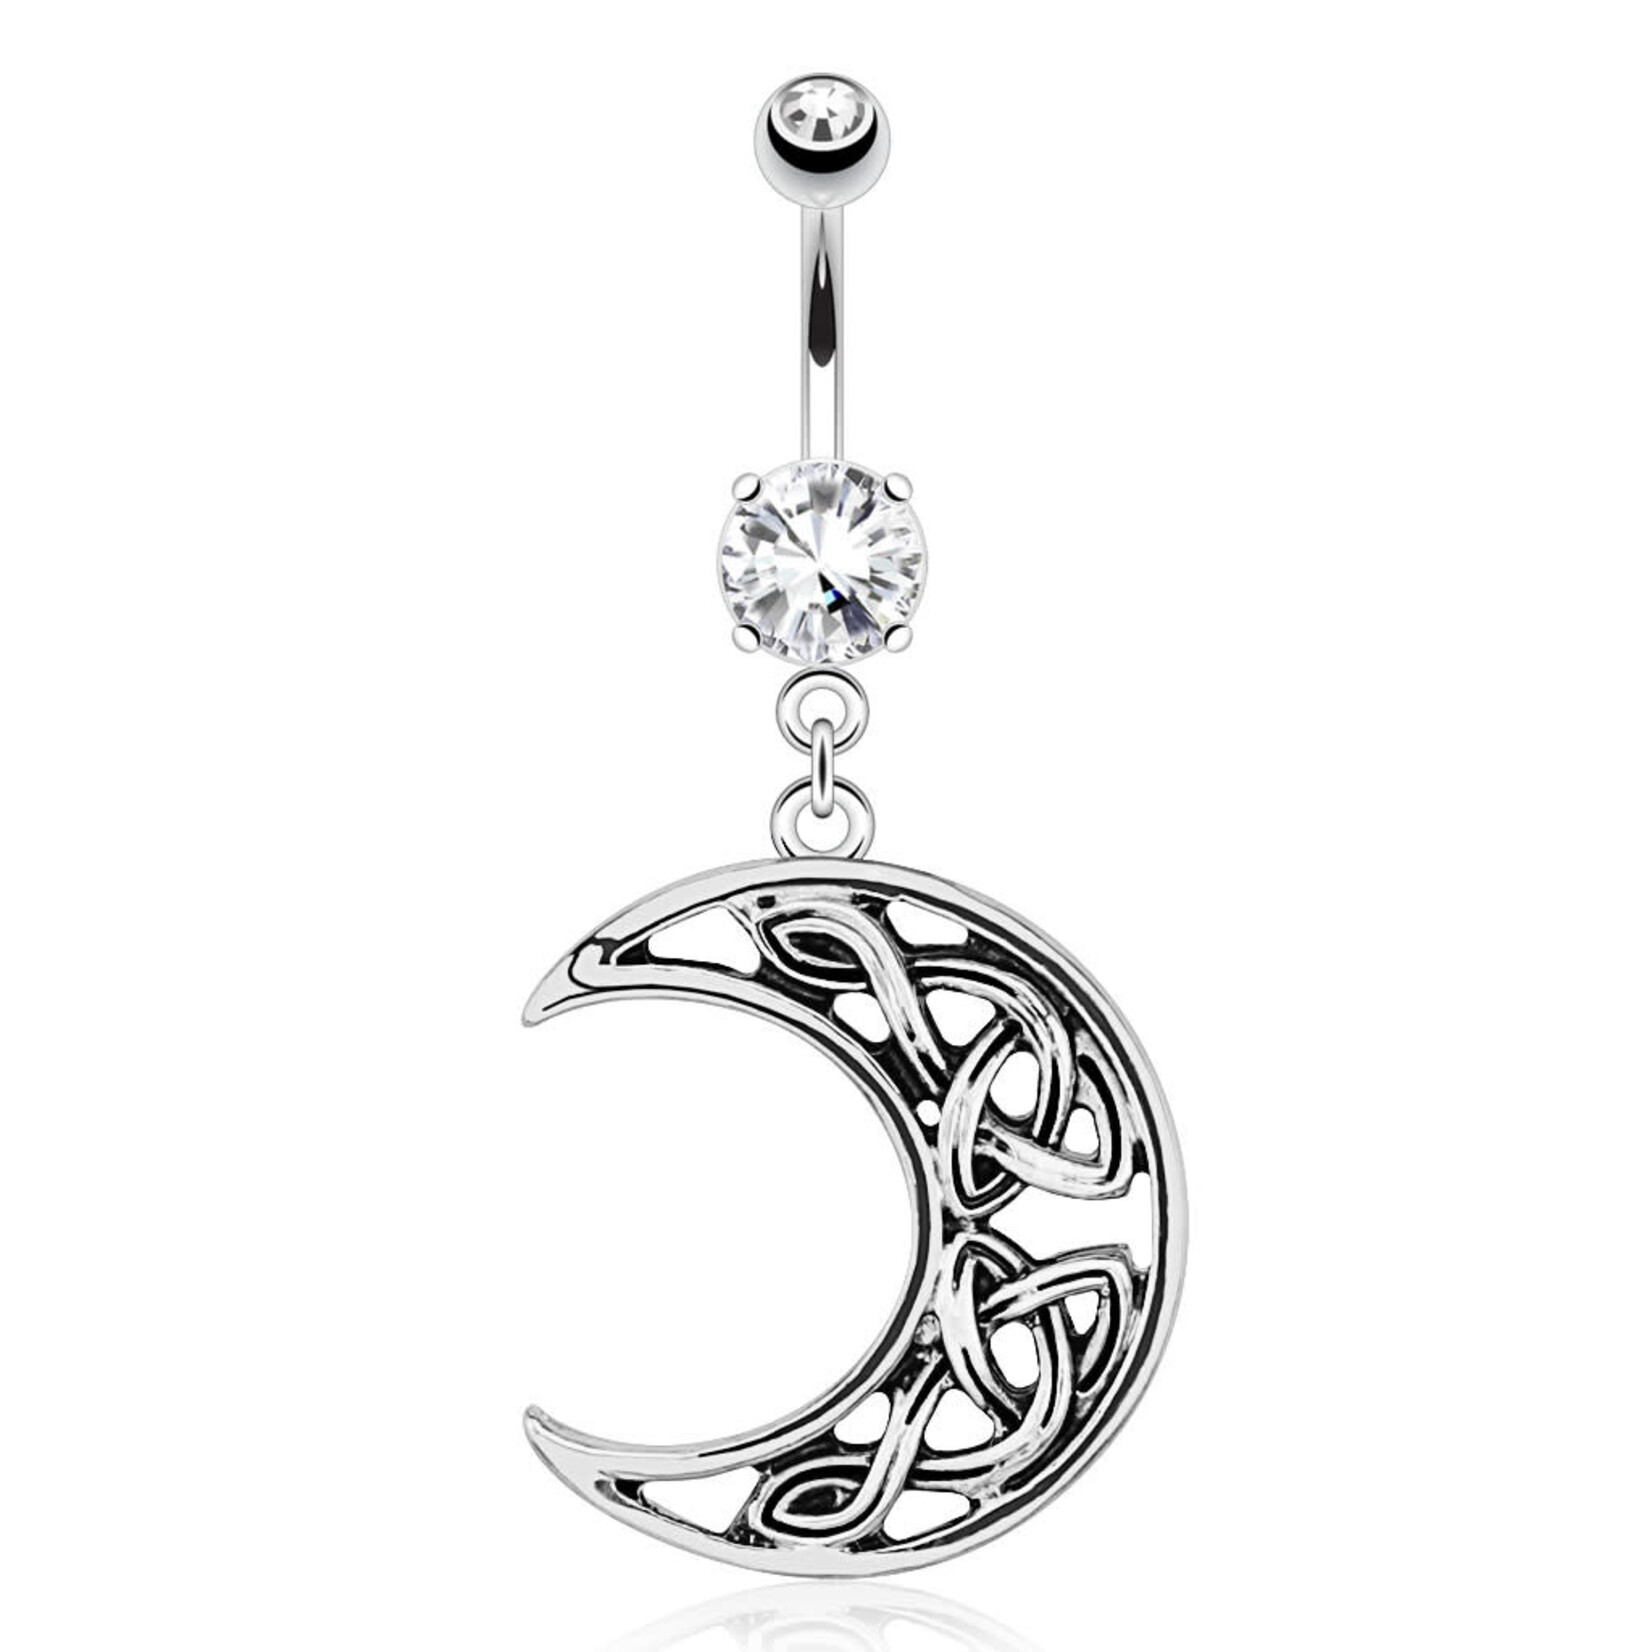 Hollywood Body Jewelry Silver Celtic Knot Navel Dangle